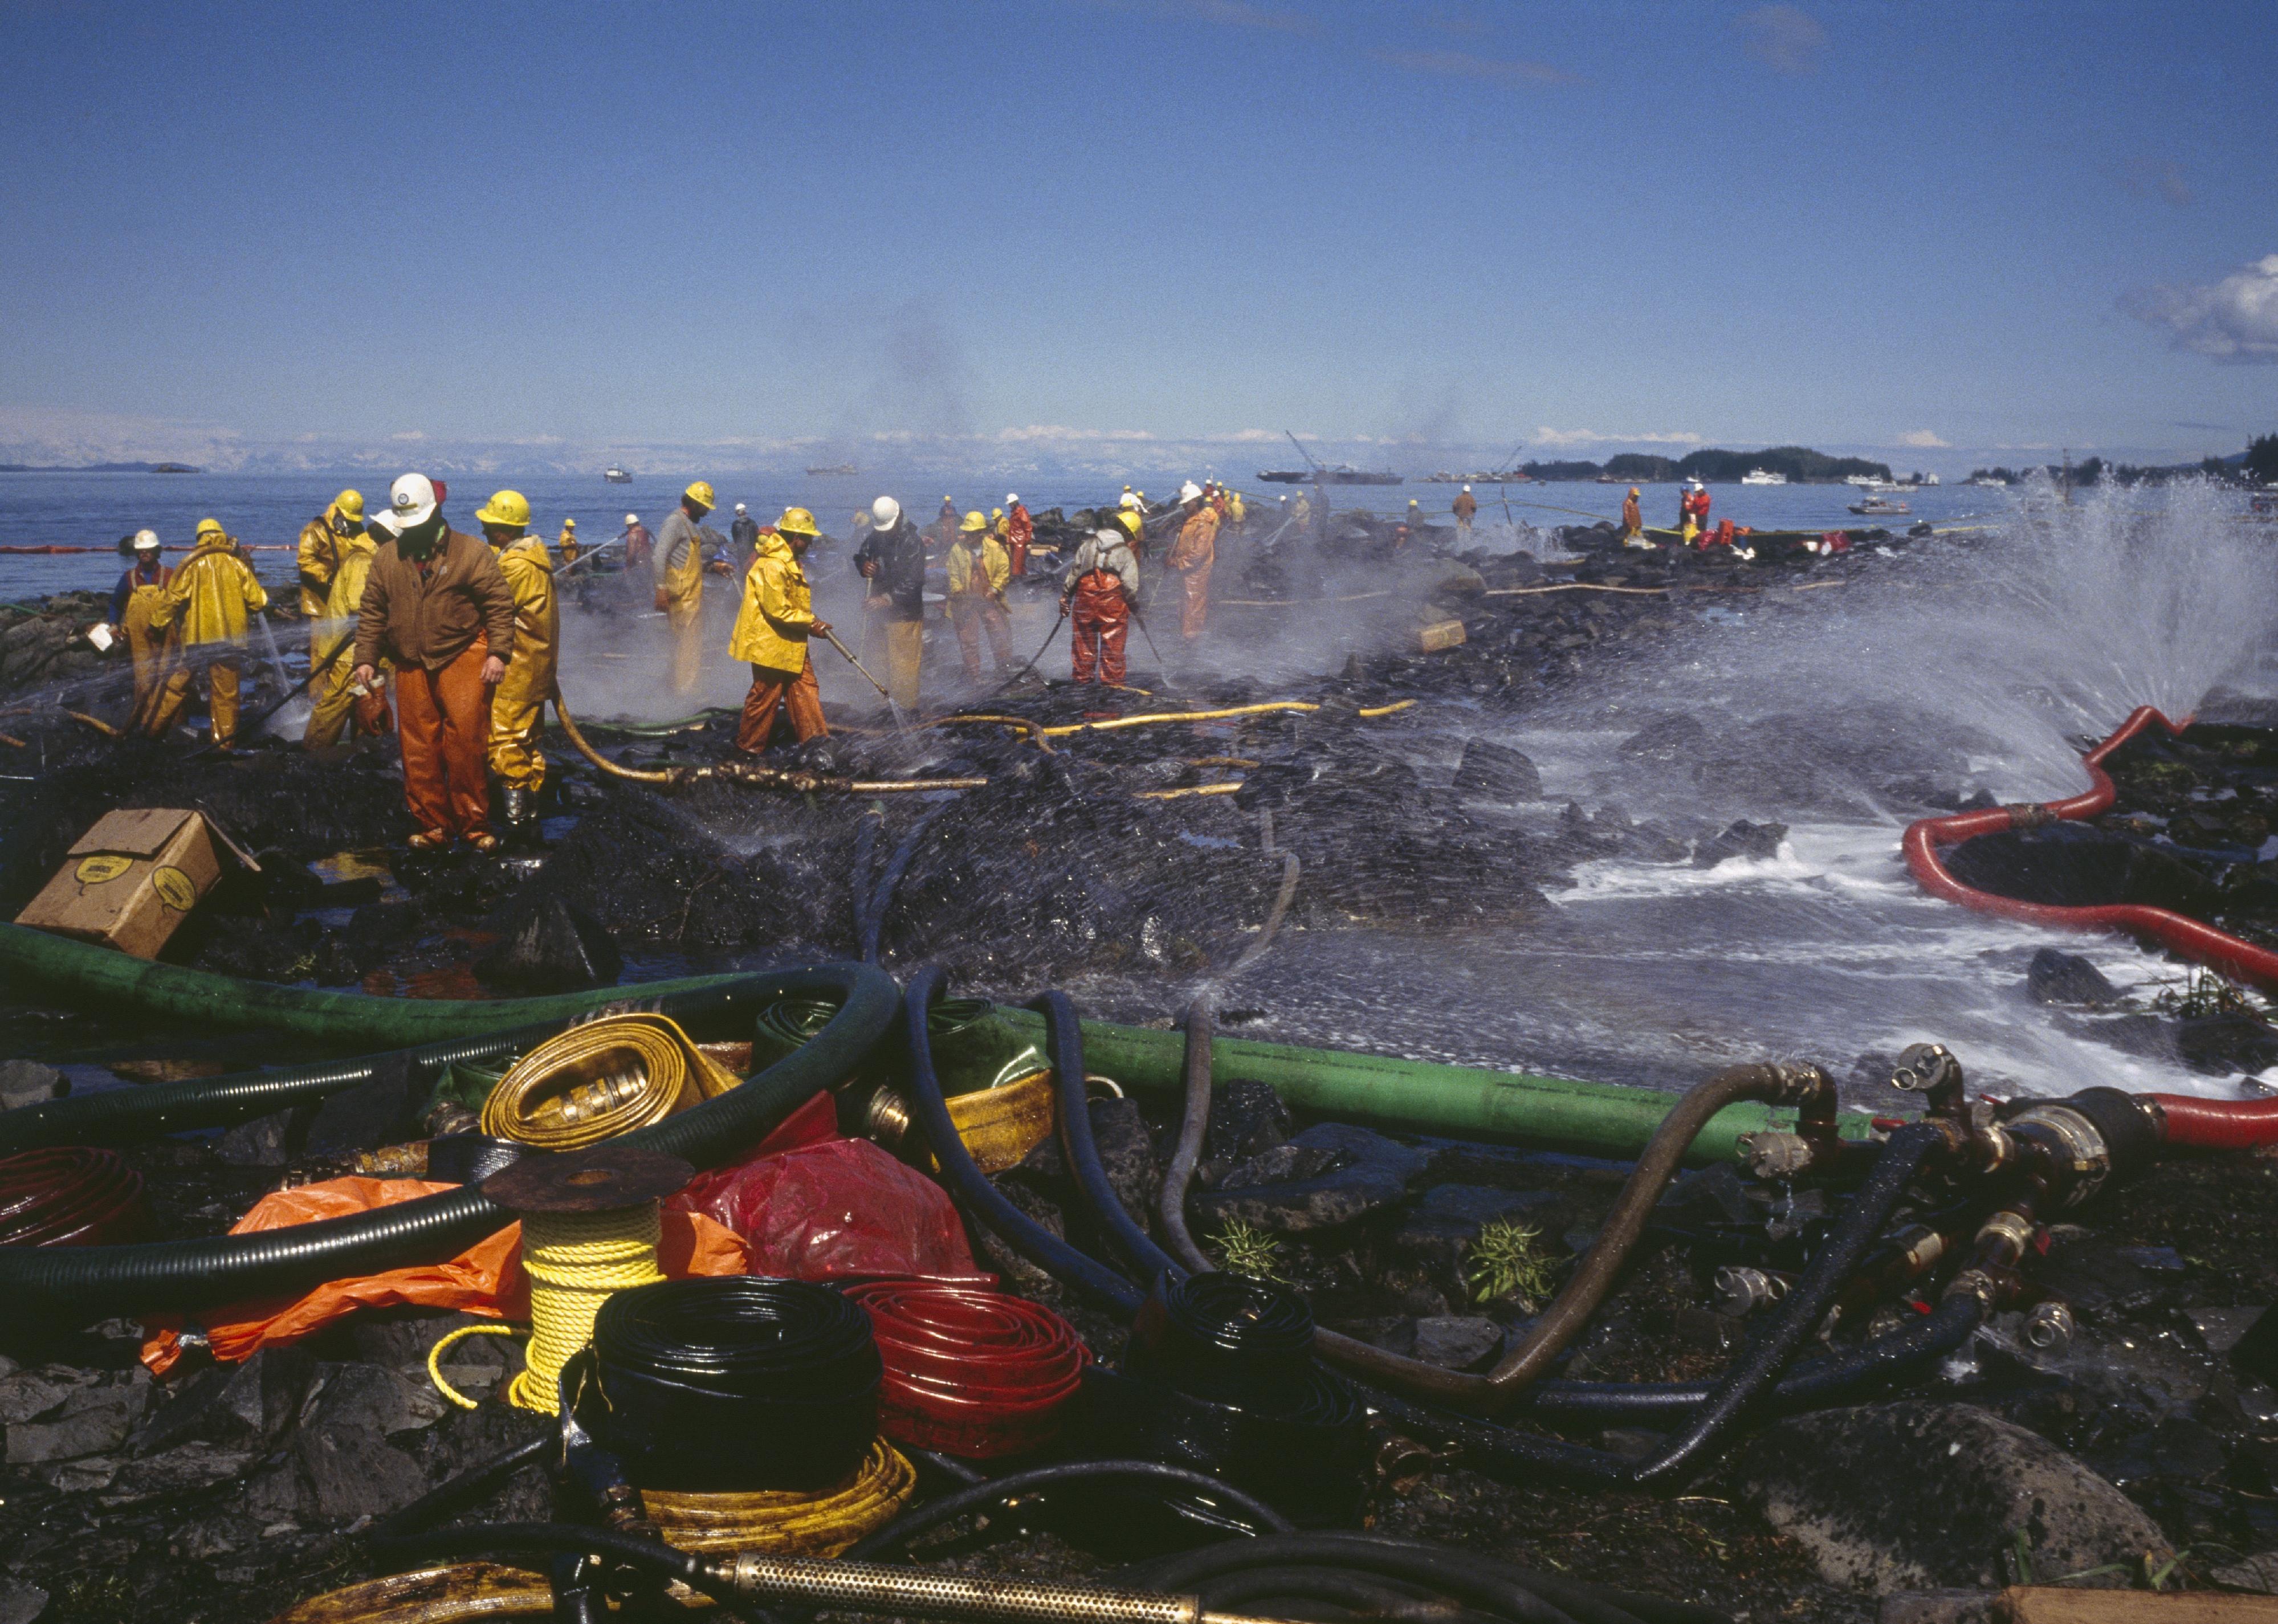 Teams of firefighters cleaning the Alaskan coast following the Exxon Valdez oil spill. 